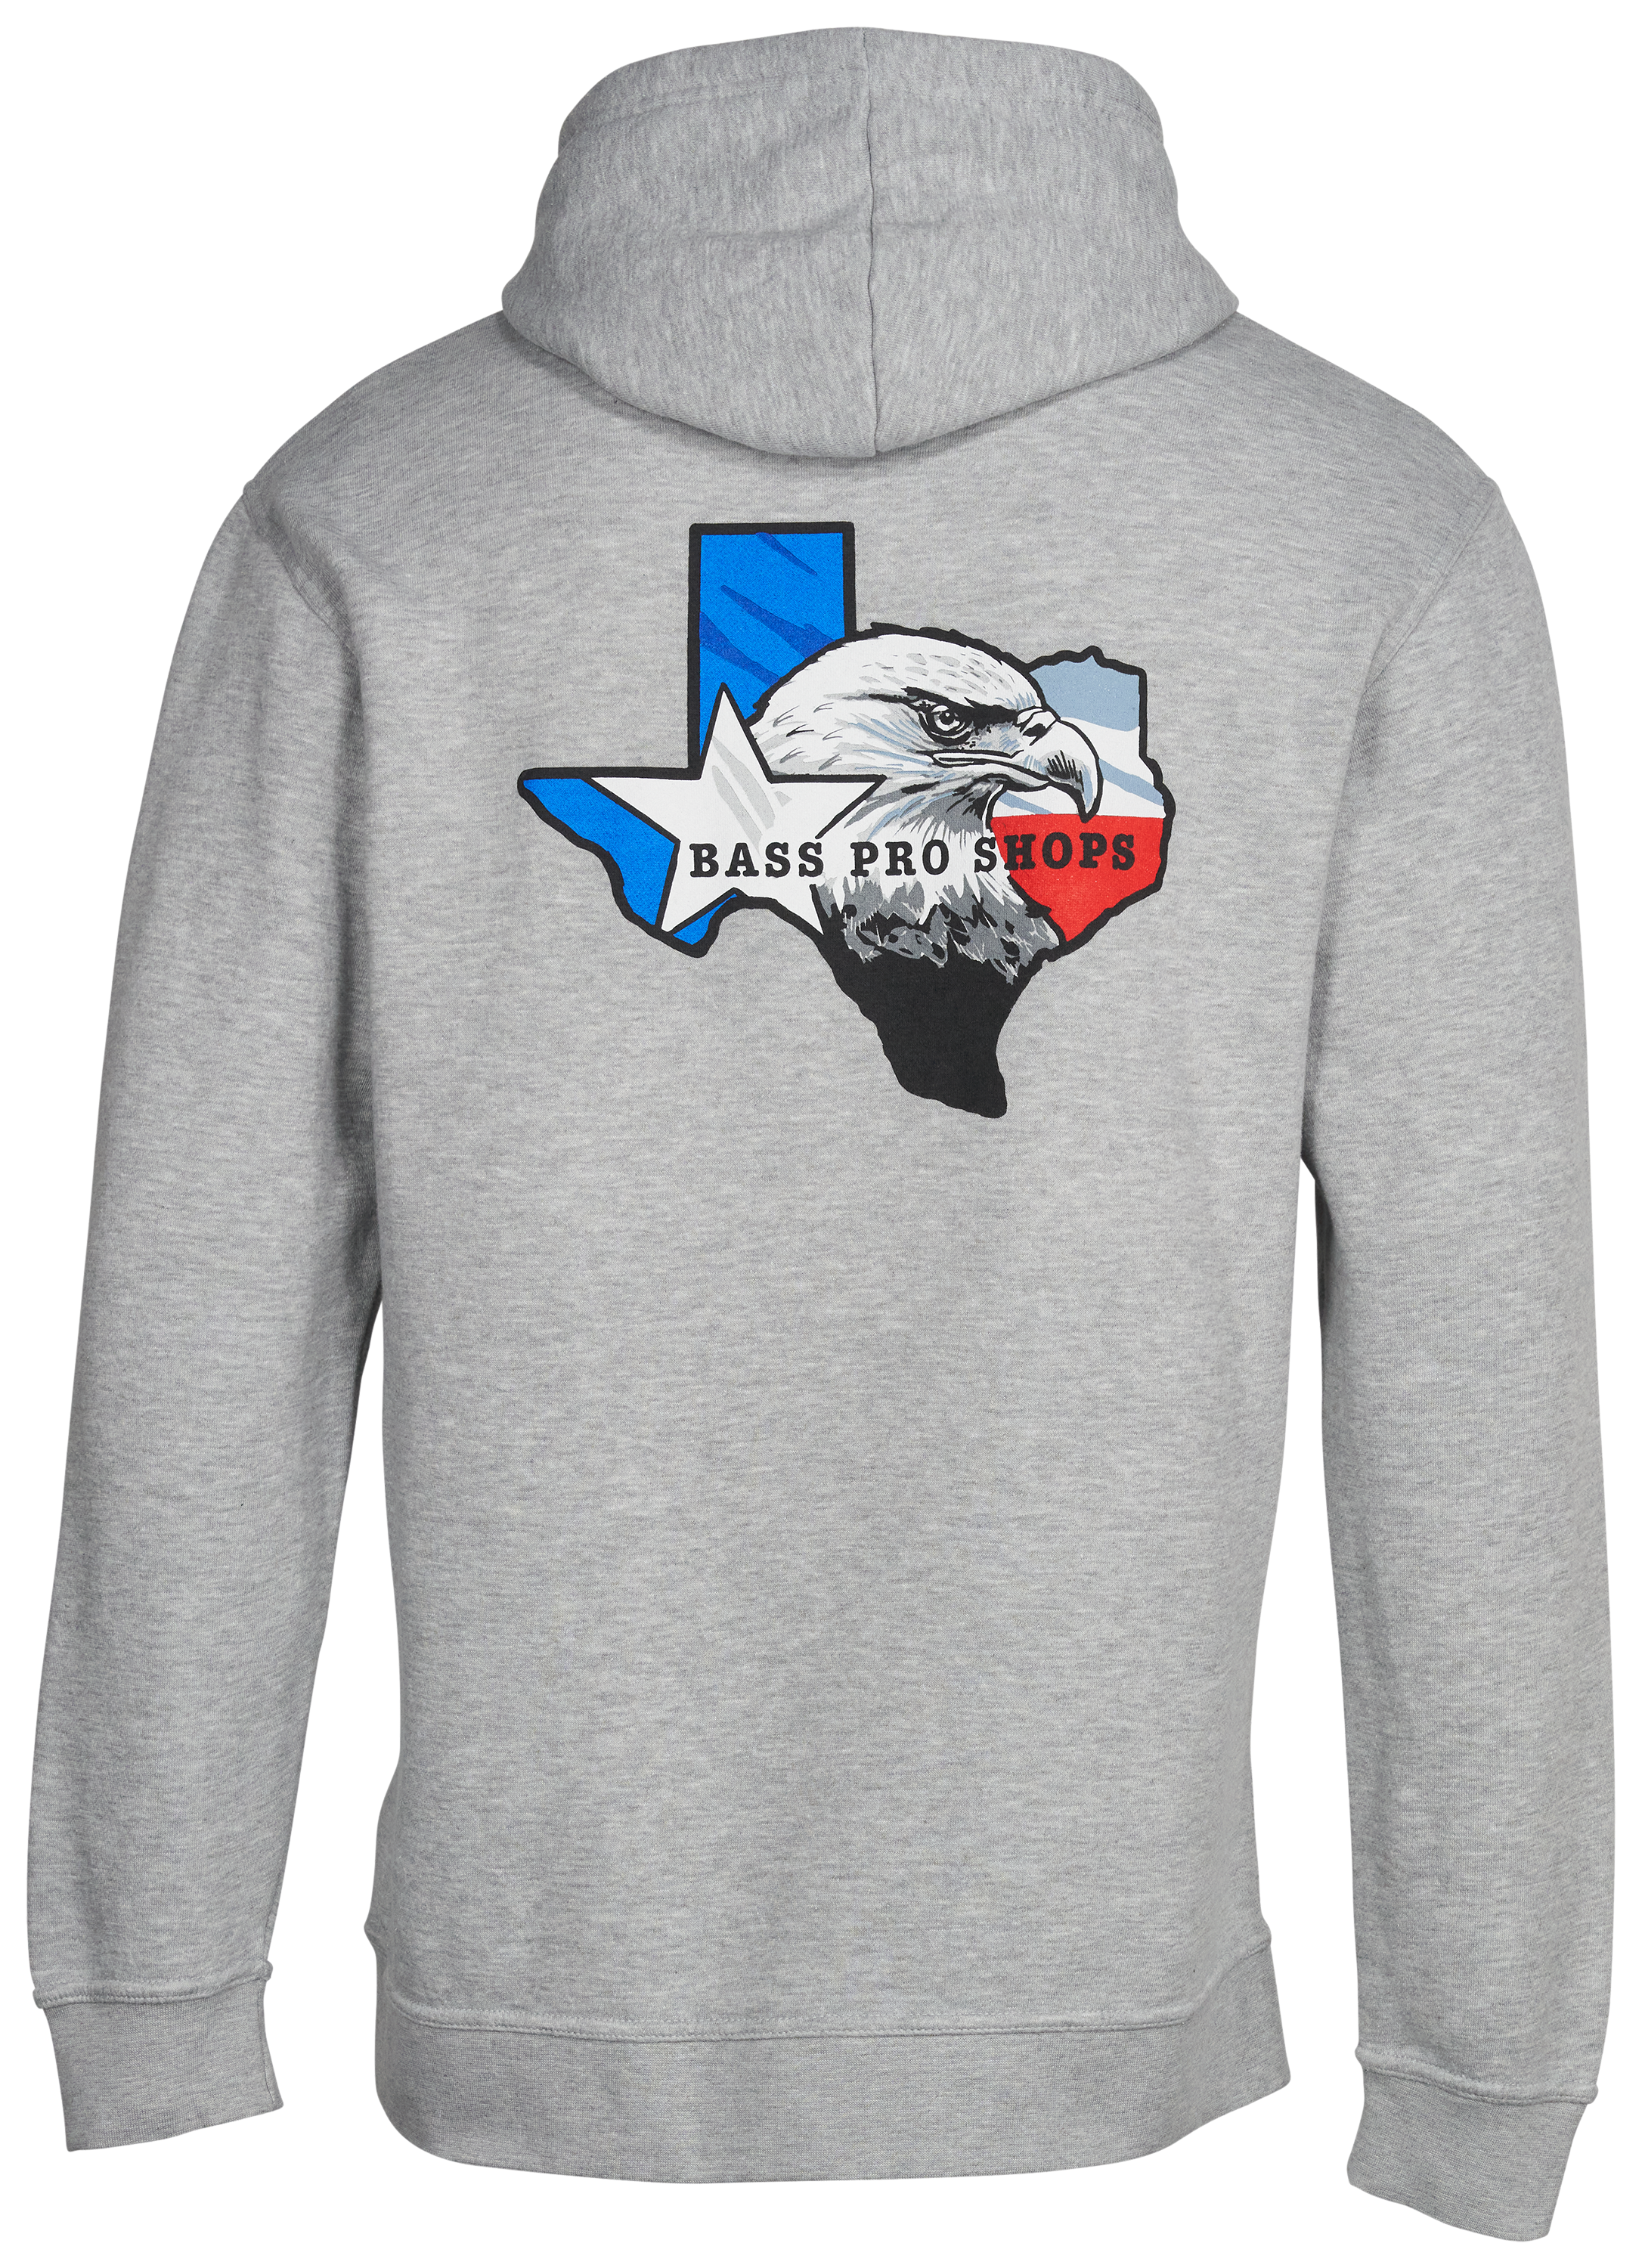 Bass Pro Shops Texas Eagle Long-Sleeve Hoodie for Men - Heather Gray - XL